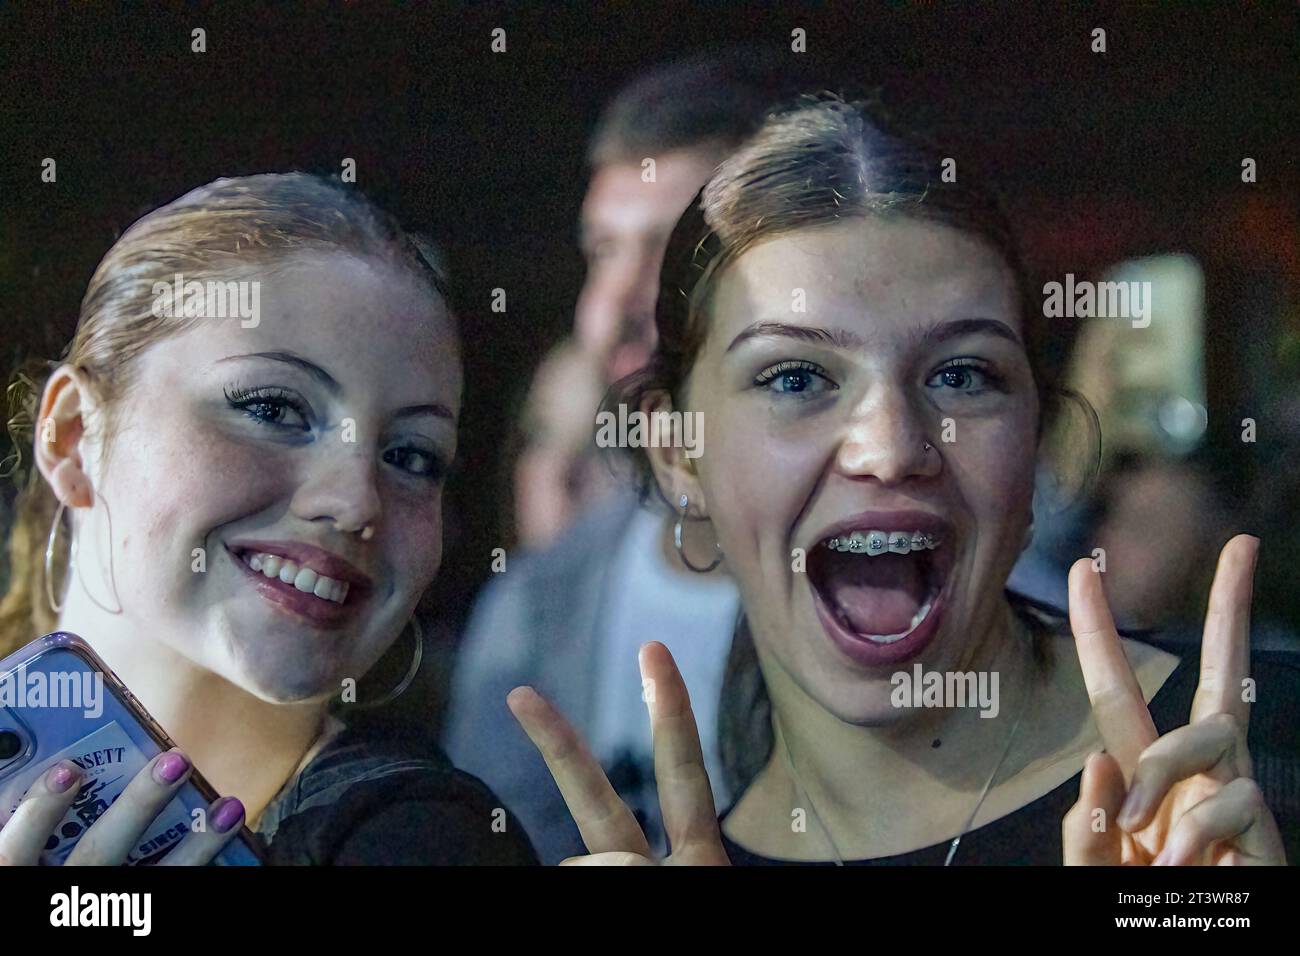 Nottingham, United Kingdom. 26th October 2023, Event: Rock City. “THE STREETS” with Special Guests “HAK BAKER” and “MASTER PEACE”.   PICTURED: FANS   Credit: Mark Dunn/Alamy Live News (To be included where the image is published). Stock Photo